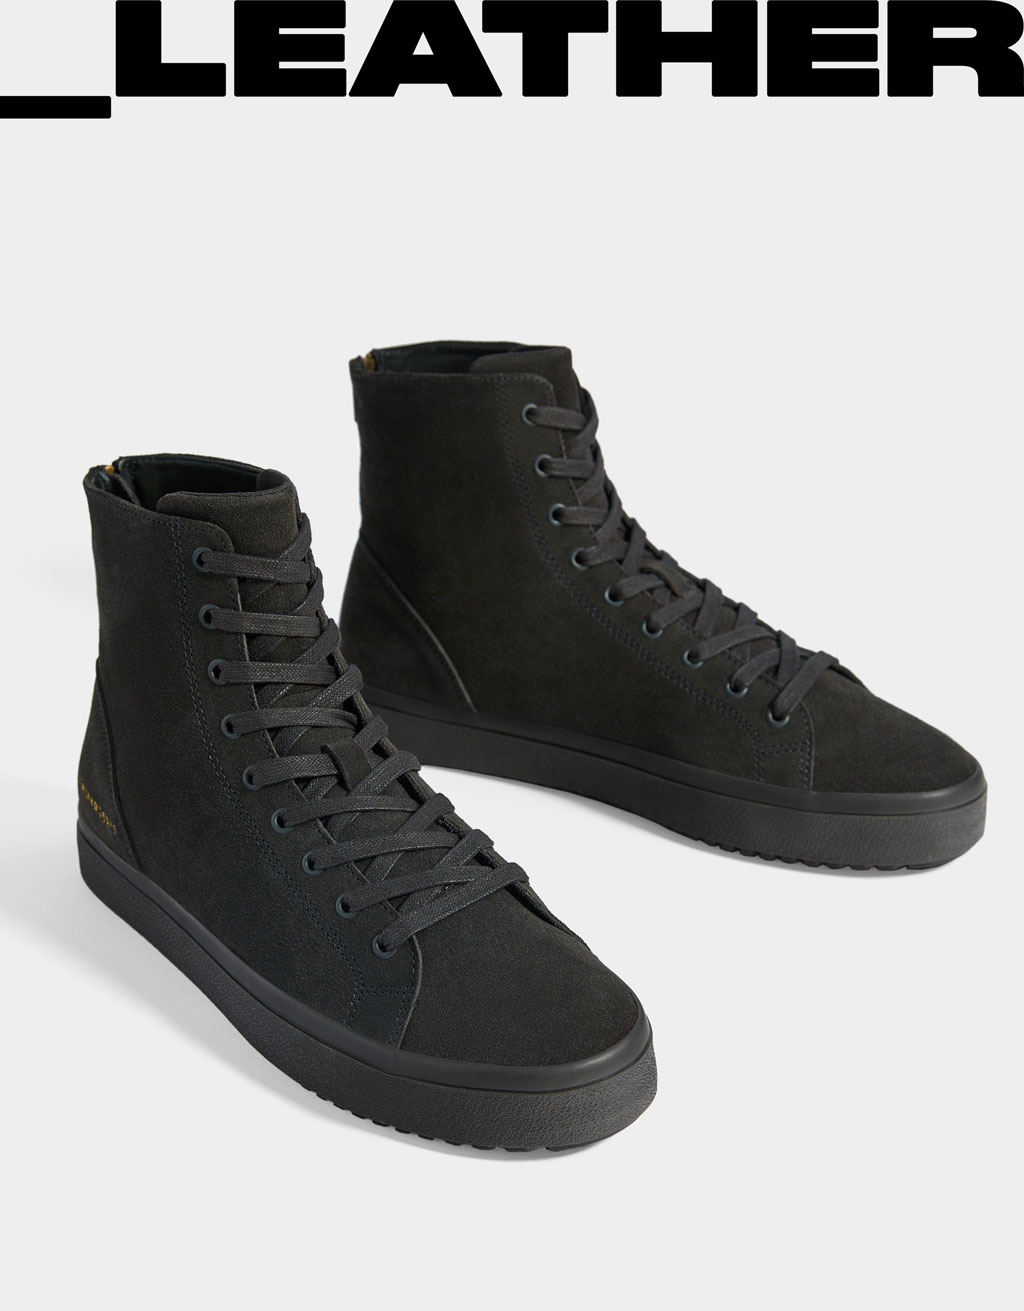 mens leather high top trainers